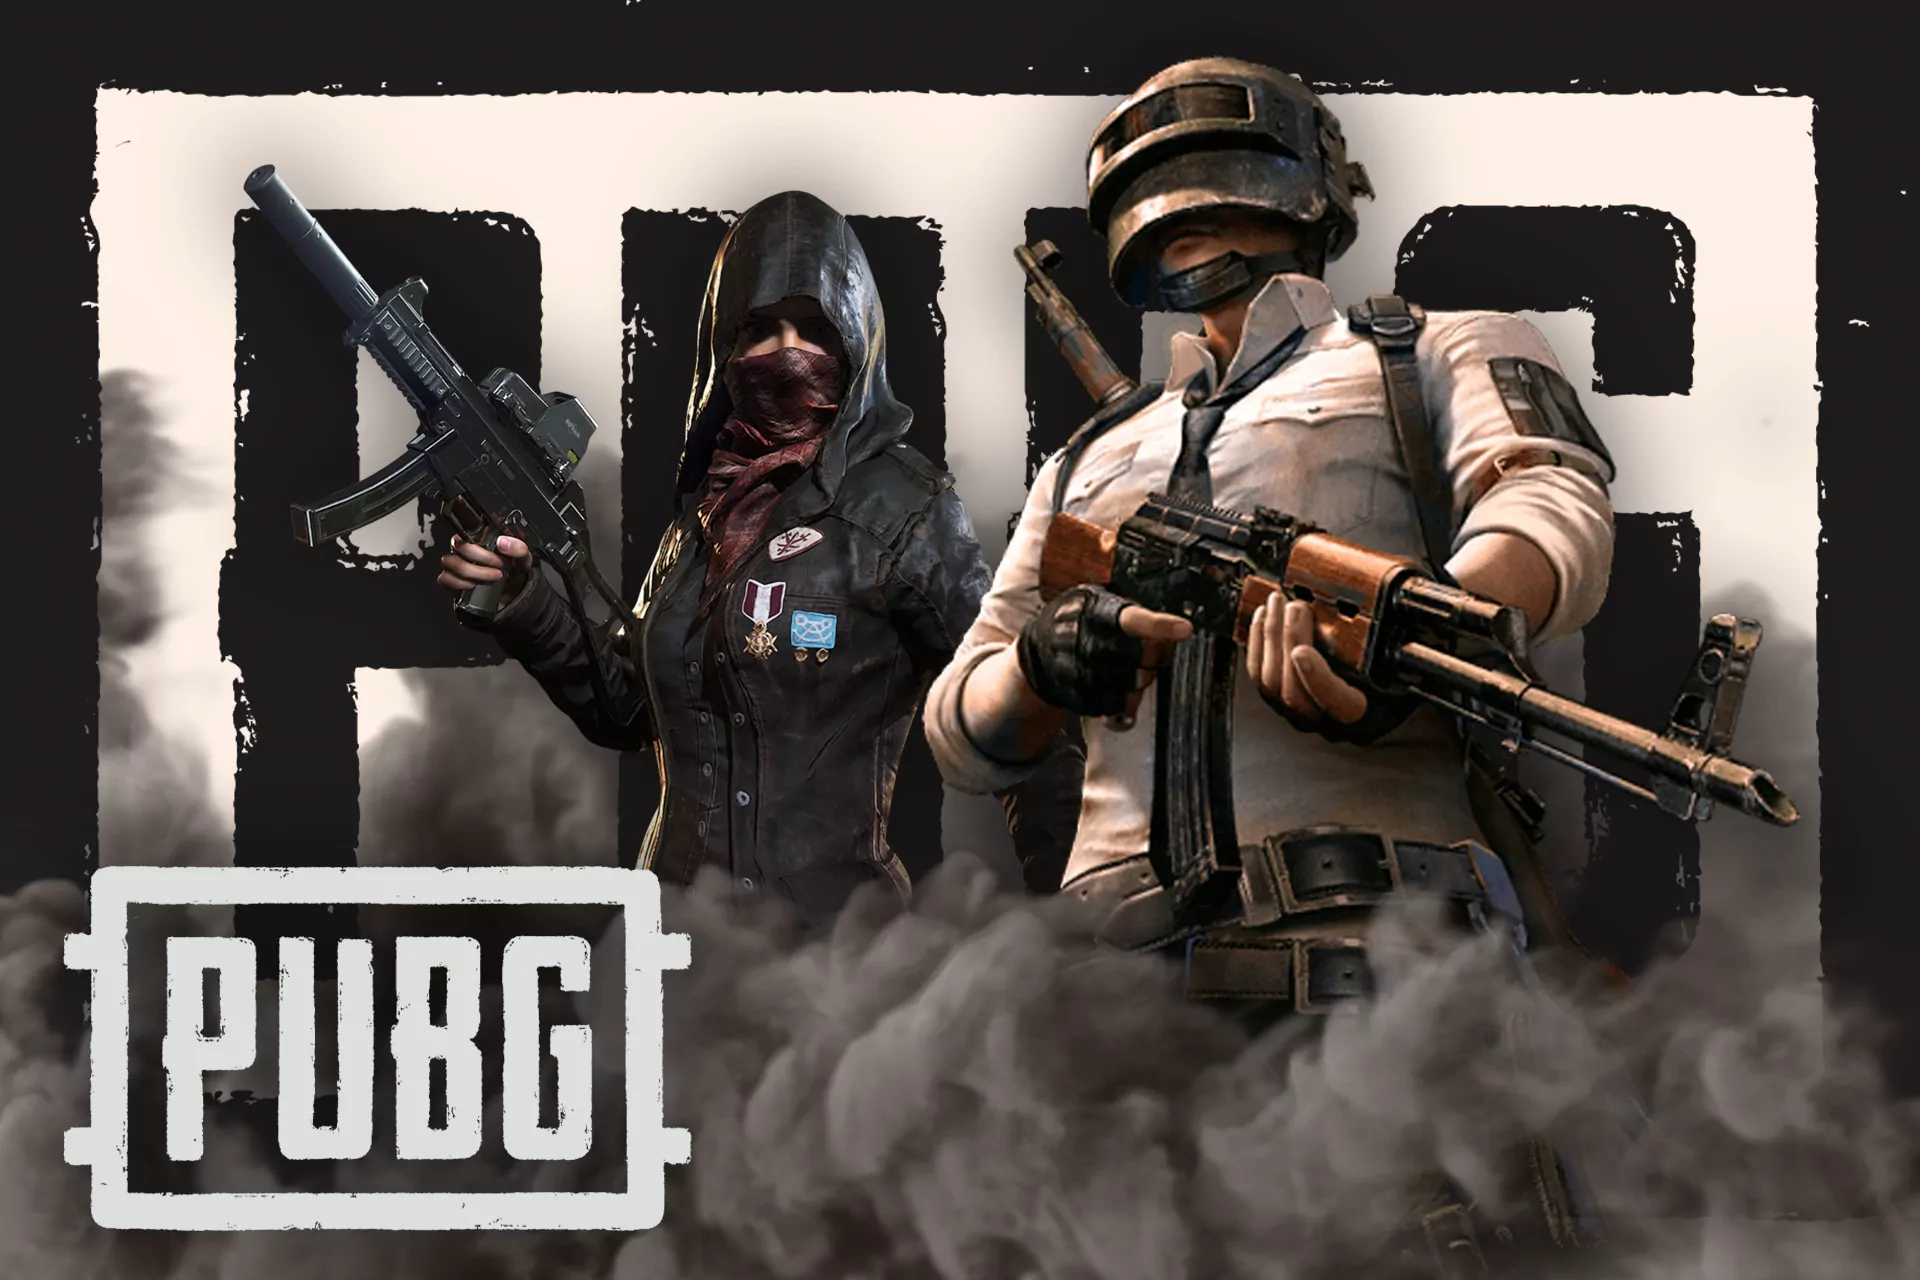 PUBG betting is also a quite popular option at the esports sections on the online betting sites.